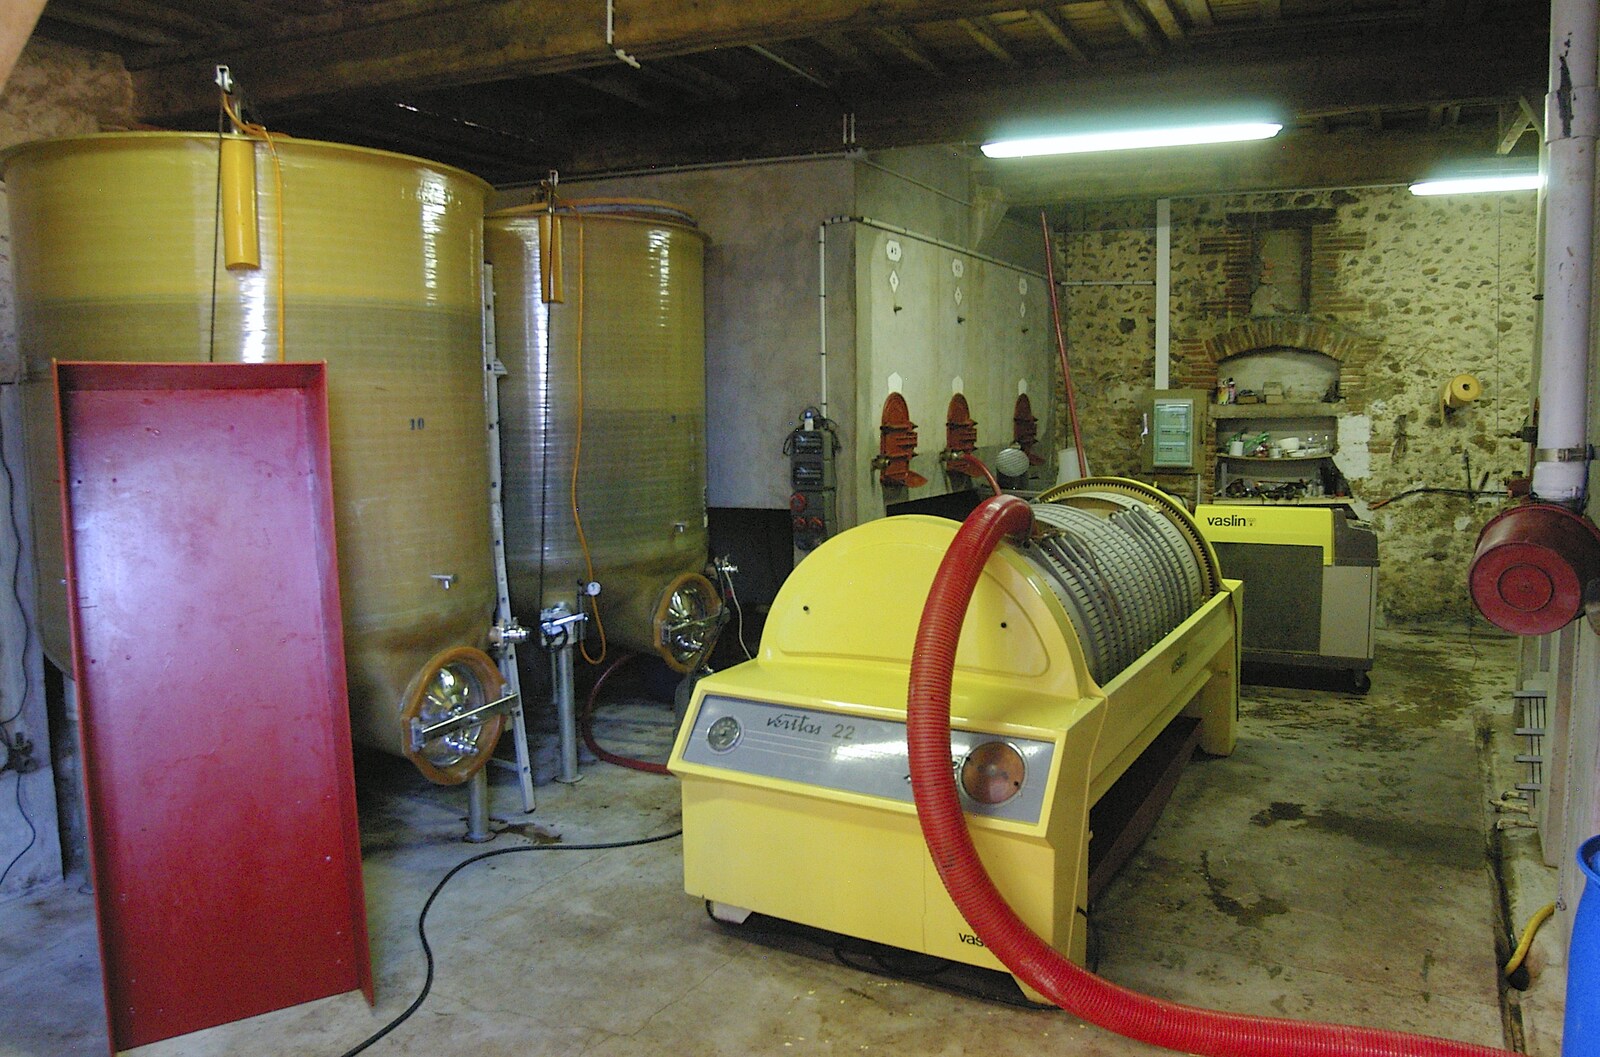 The grape press and some fermentation tanks from Grape Picking and Pressing, Roussillon, France - 19th September 2006